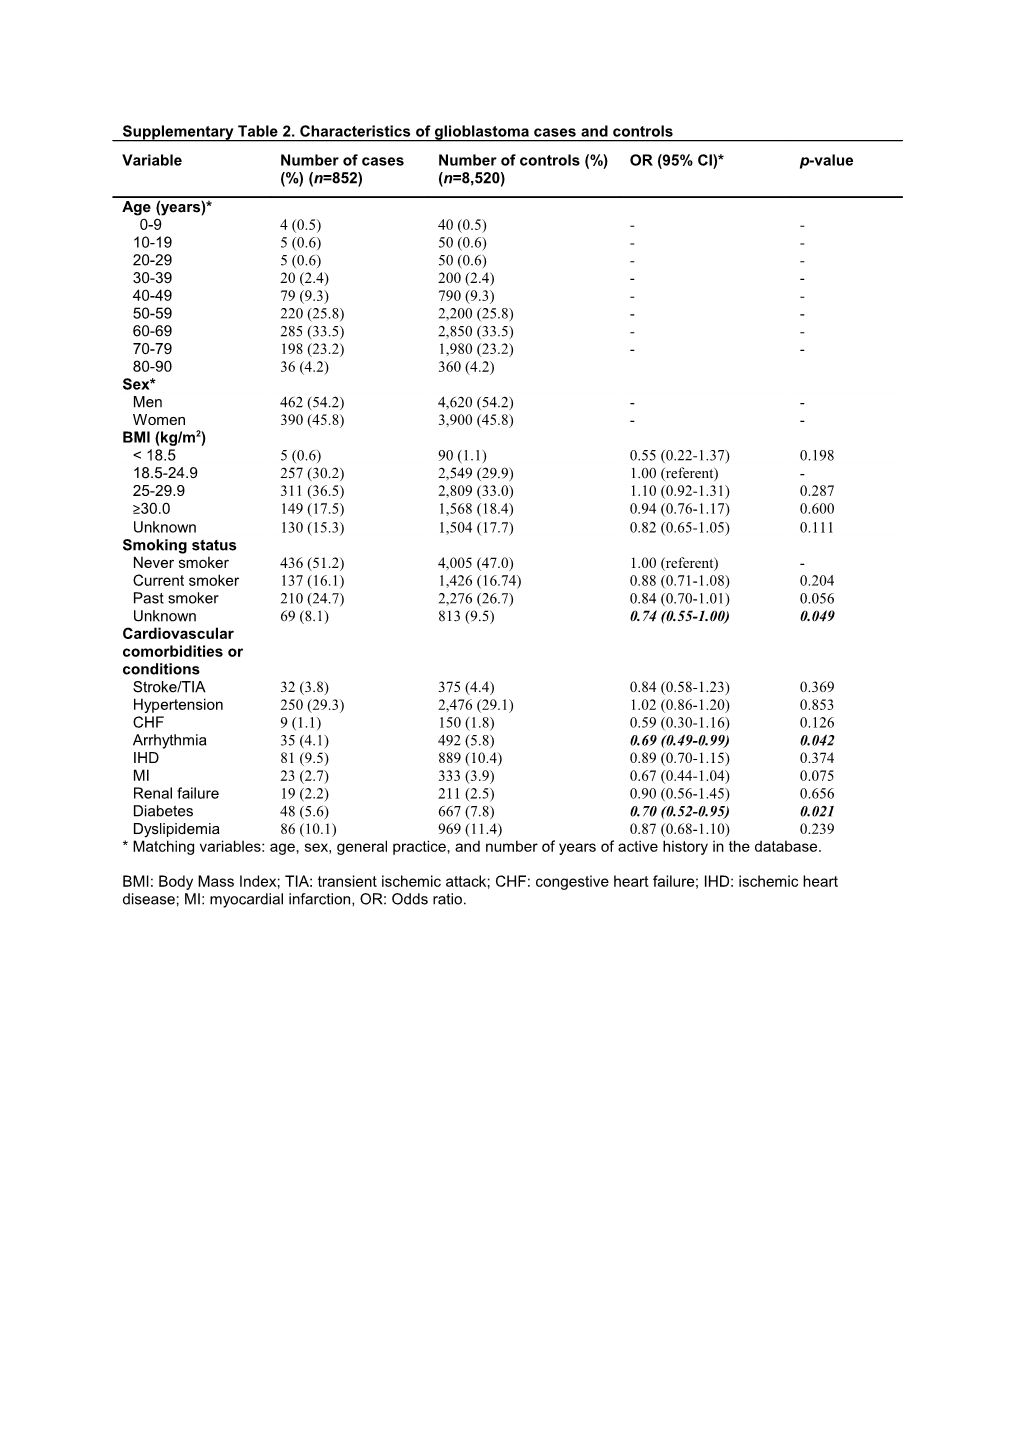 Supplementary Table 2. Characteristics of Glioblastoma Cases and Controls